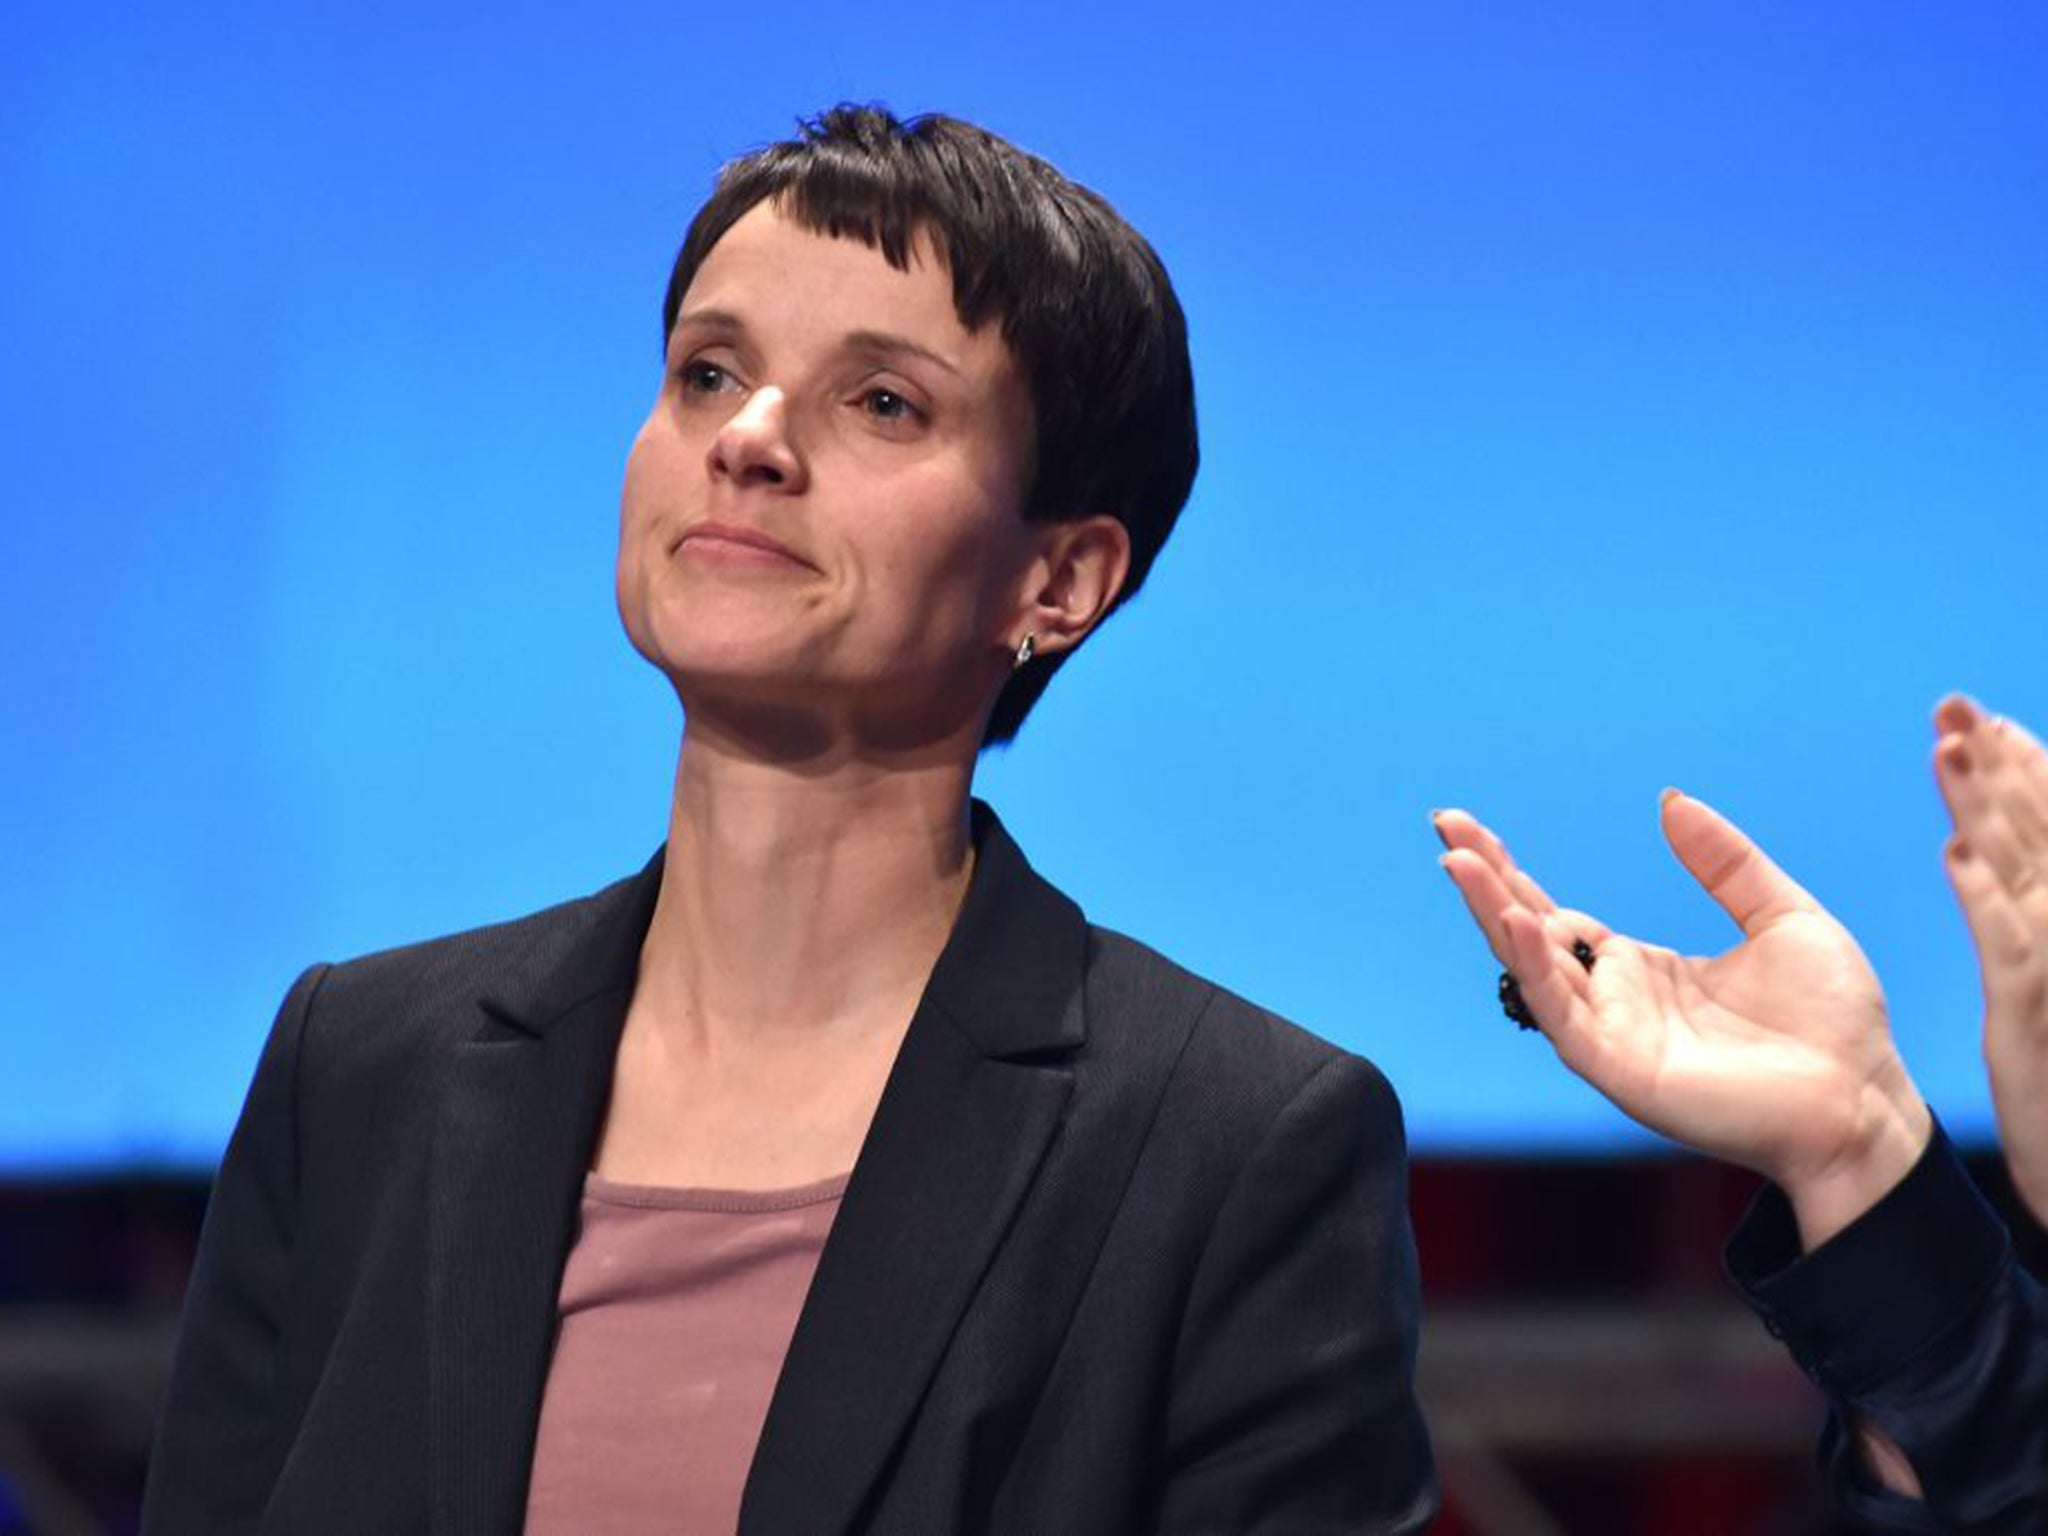 Frauke Petry has a reputation for appearing  entirely reasonable while  supporting the xenophobic far right 